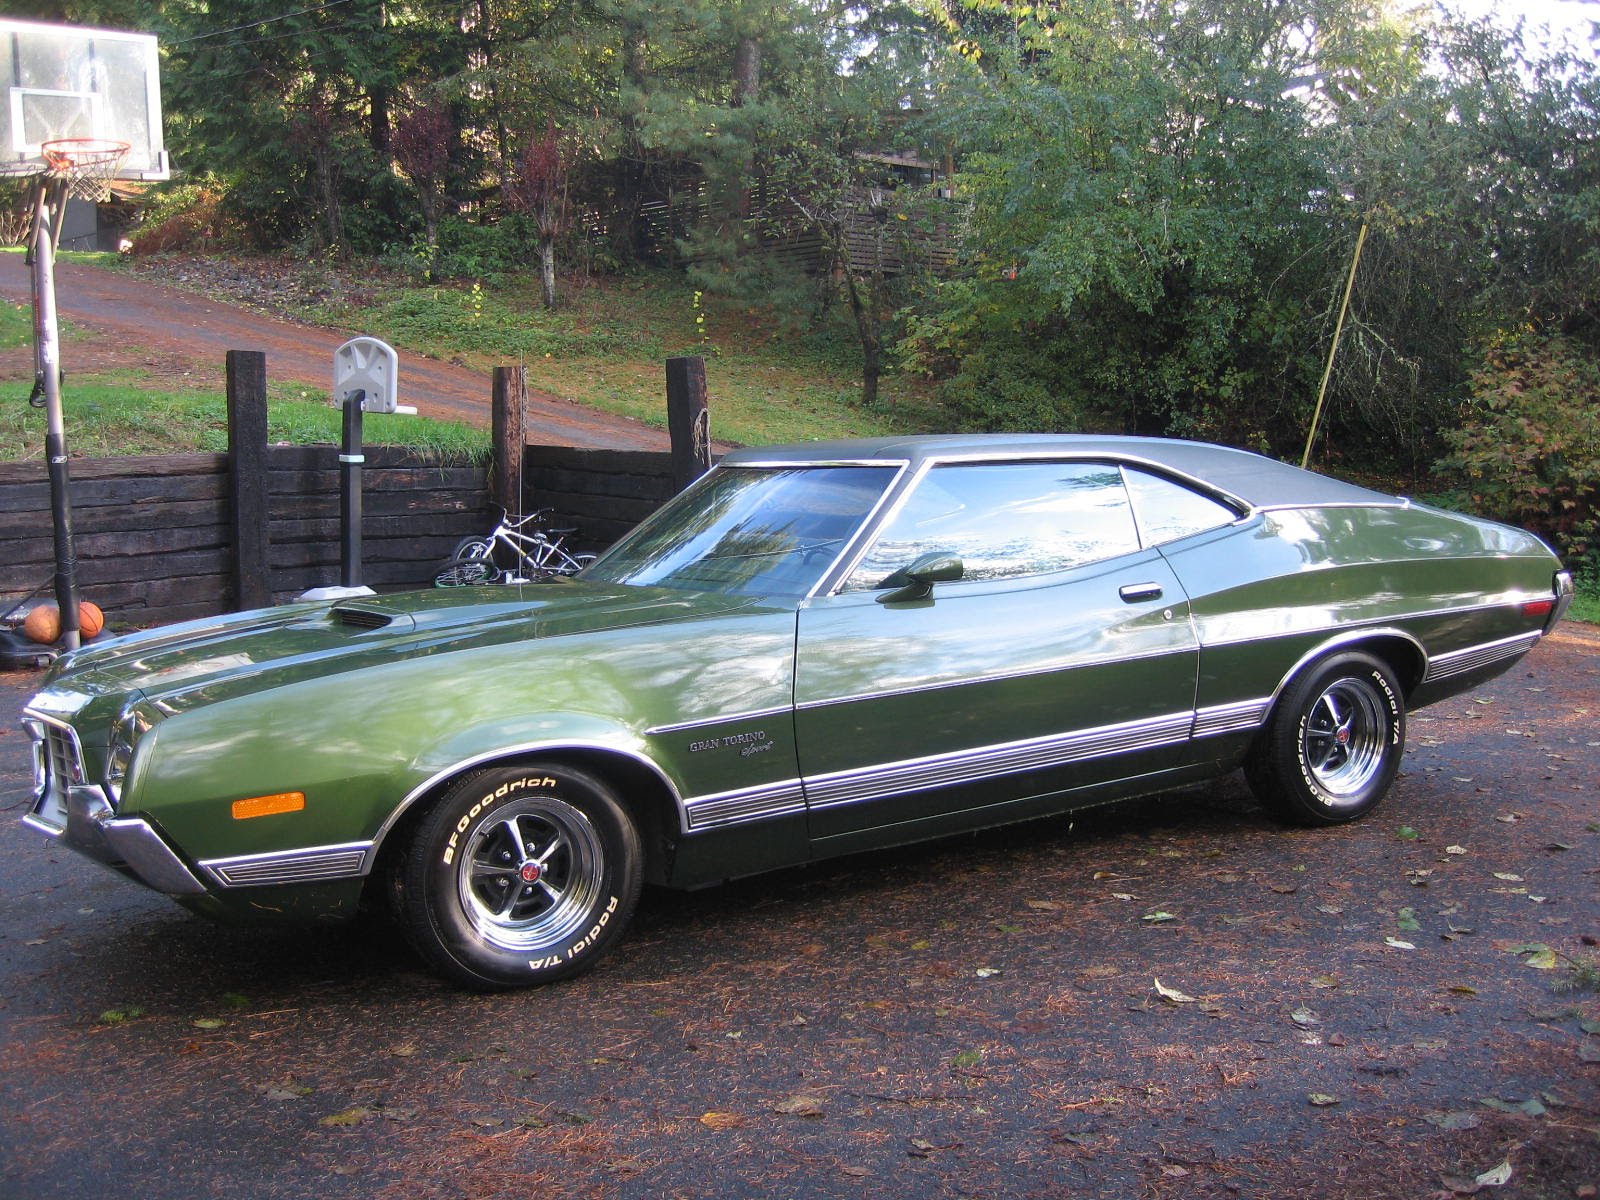 1972 Ford Gran Torino Sport Backgrounds, Compatible - PC, Mobile, Gadgets| 1600x1200 px